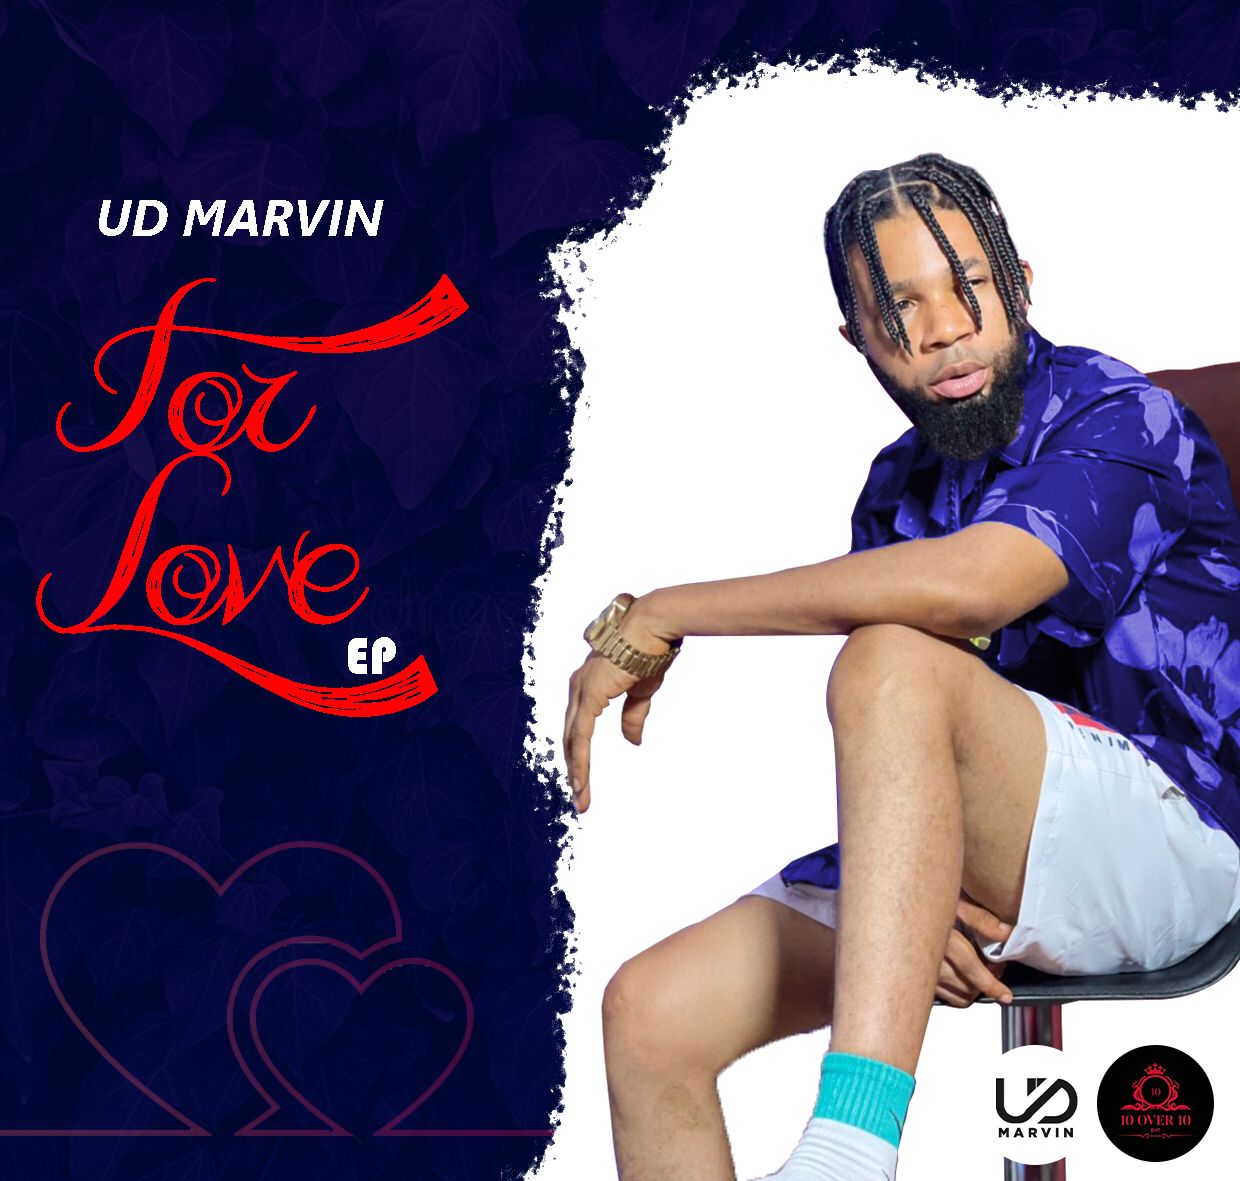 UD Marvin - For Love